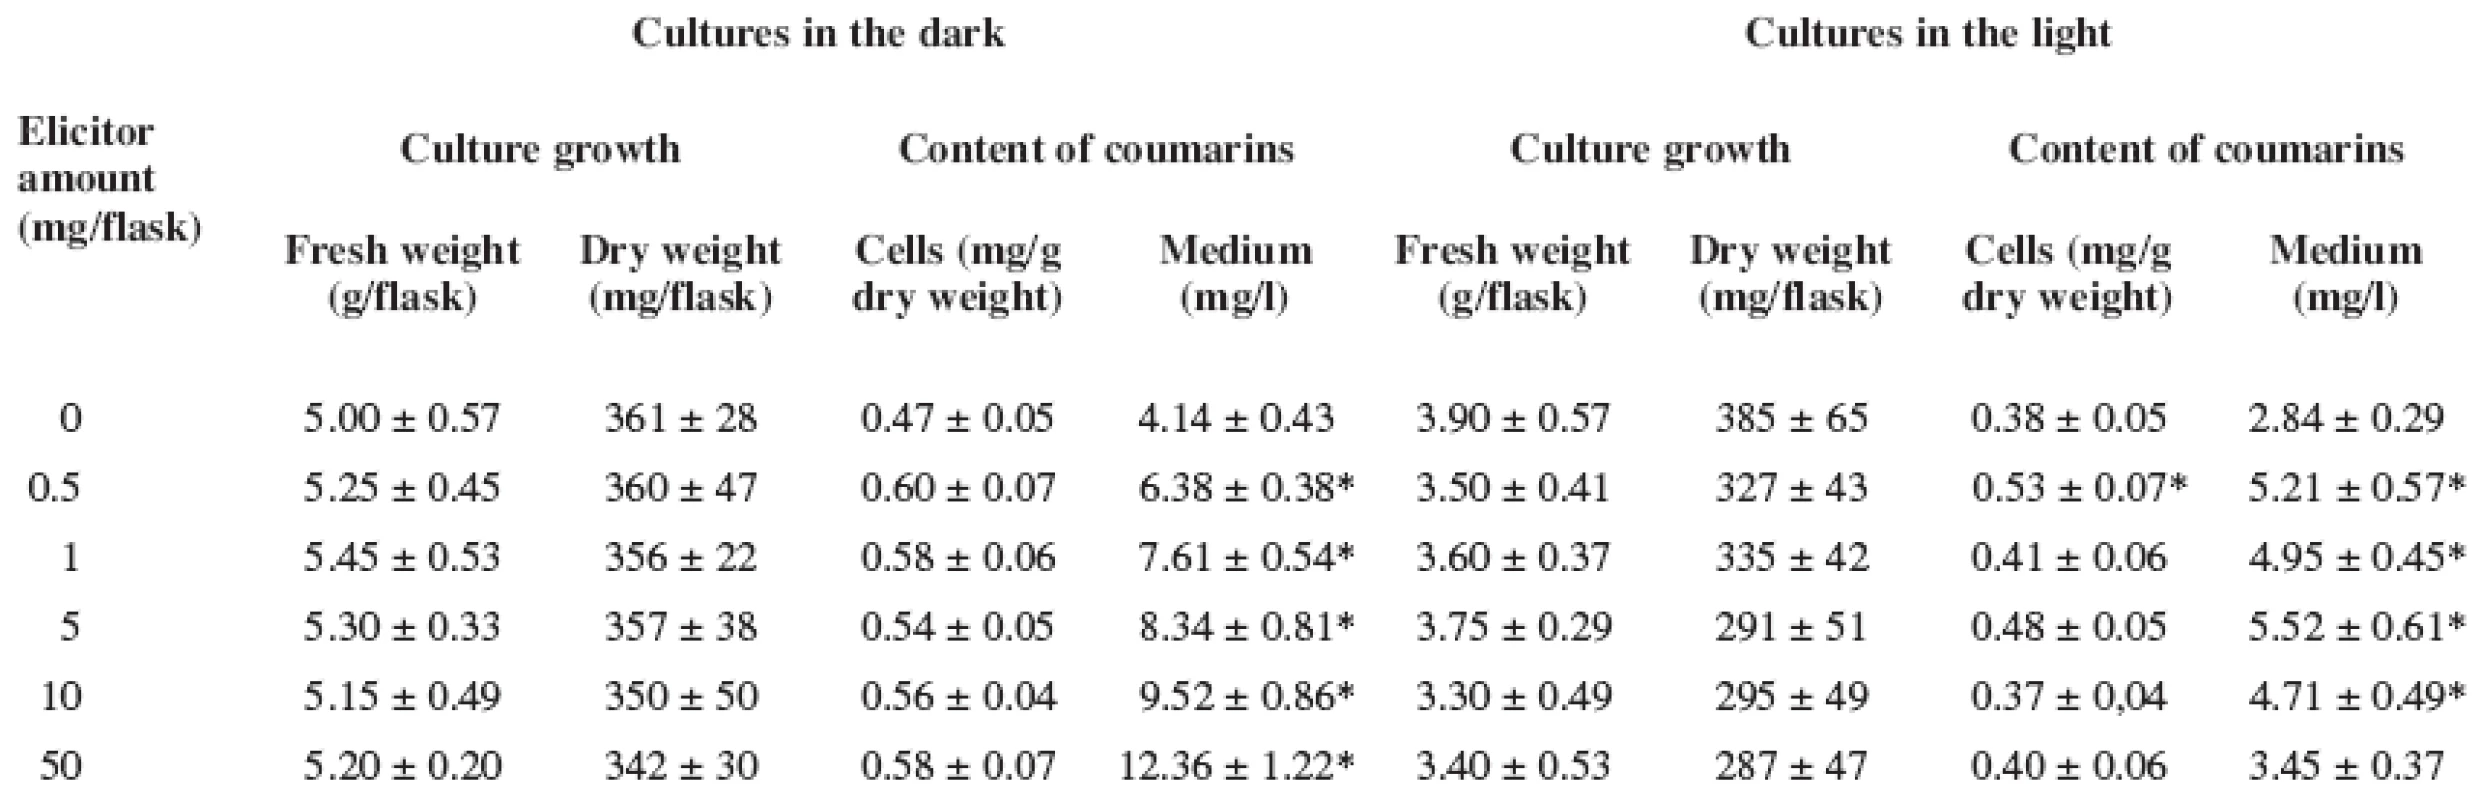 Effect of Pythium aphanidermatum elicitor on biomass accumulation and production of coumarins in Angelica archangelica cell suspension cultures grown under dark and light conditions in the hormone free medium
(Data represent as the means with standard deviations. Values with asterisks * are significantly higher in comparison with control cultures, P &lt; 0.05)